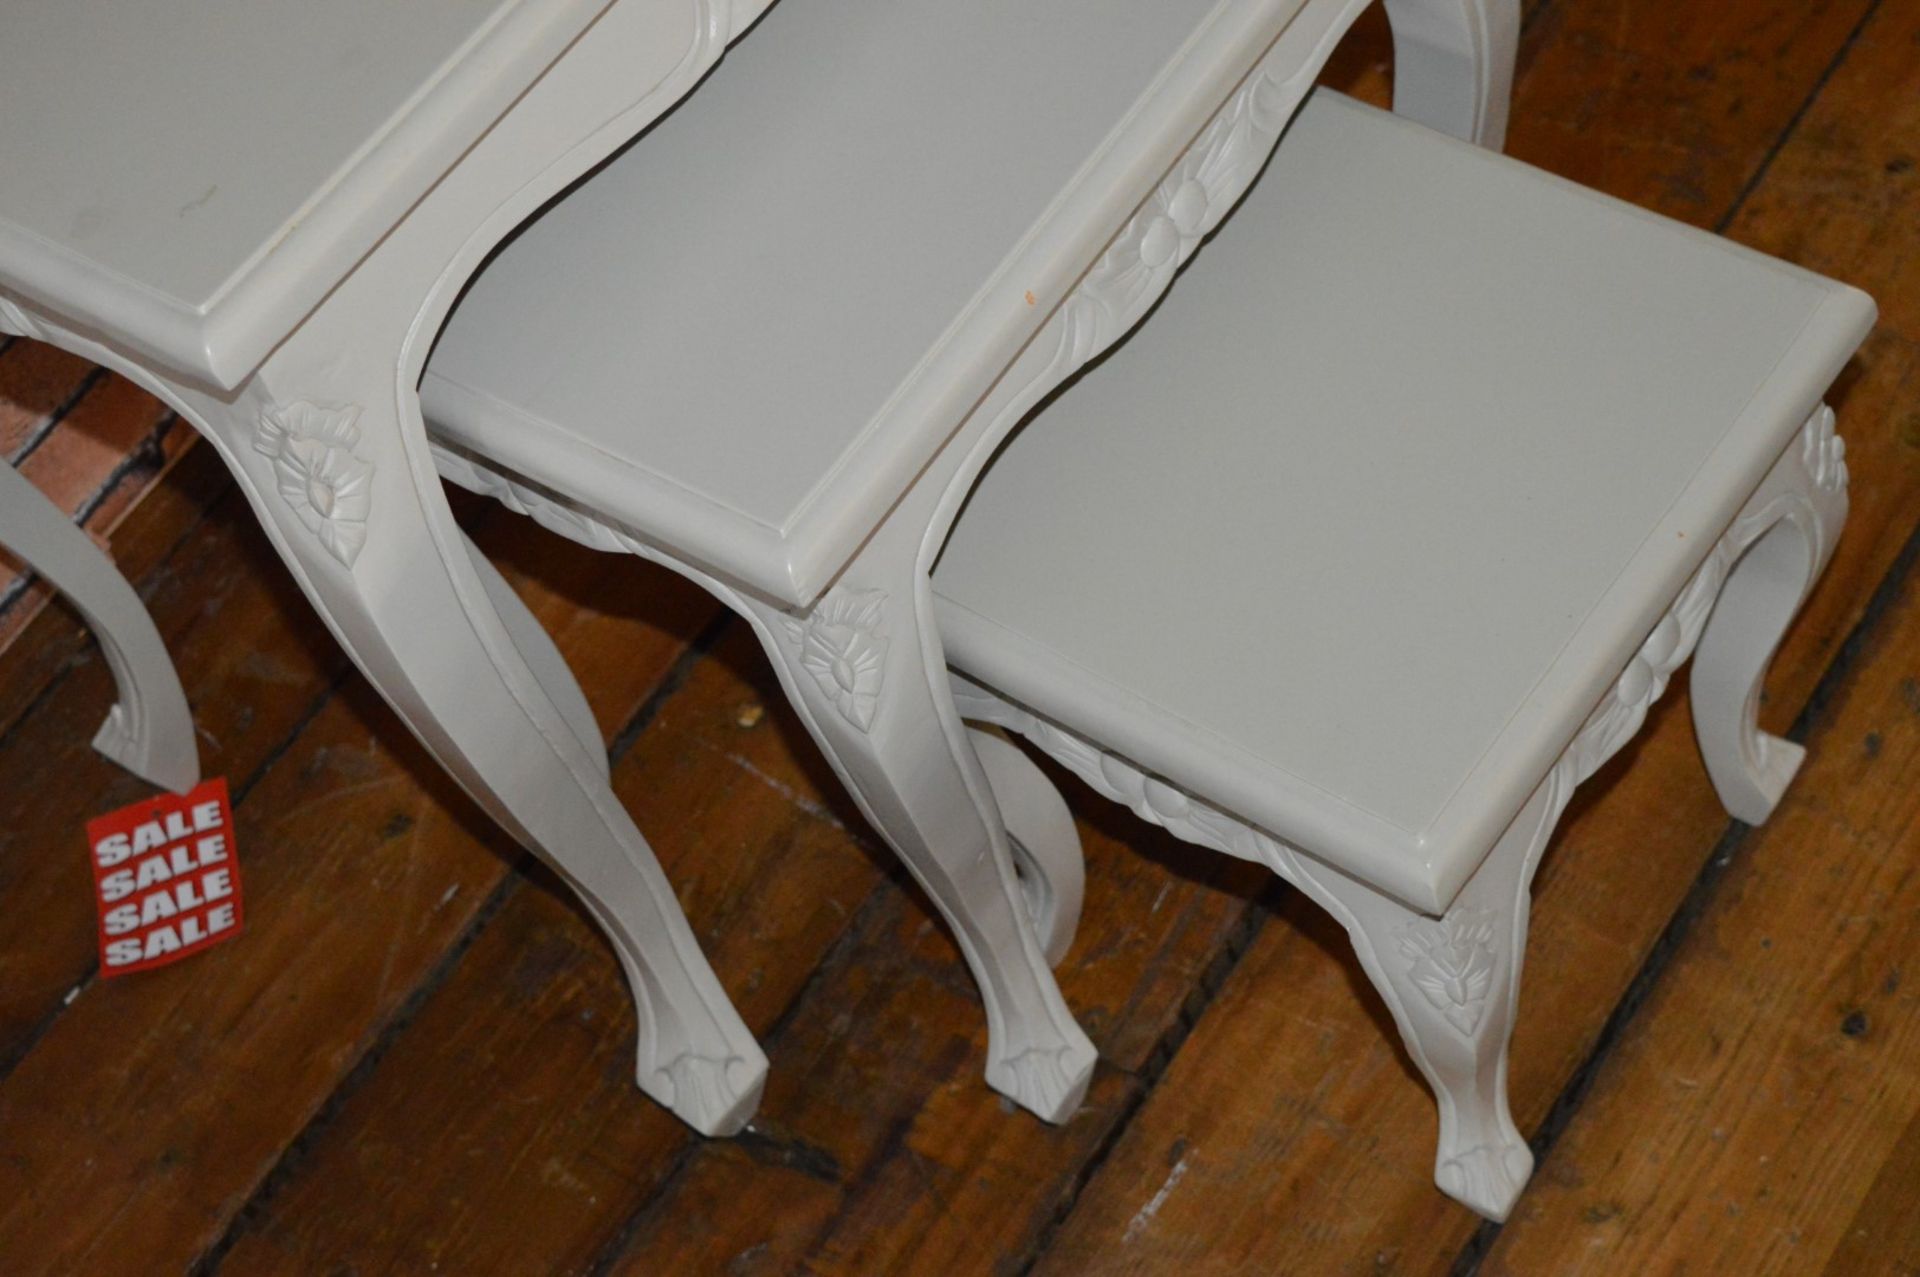 1 x Nest of Three Tables Finished in a Contemporary Grey - H61 x W59 x D45 cms - Ref BB1715 2F - - Image 5 of 6